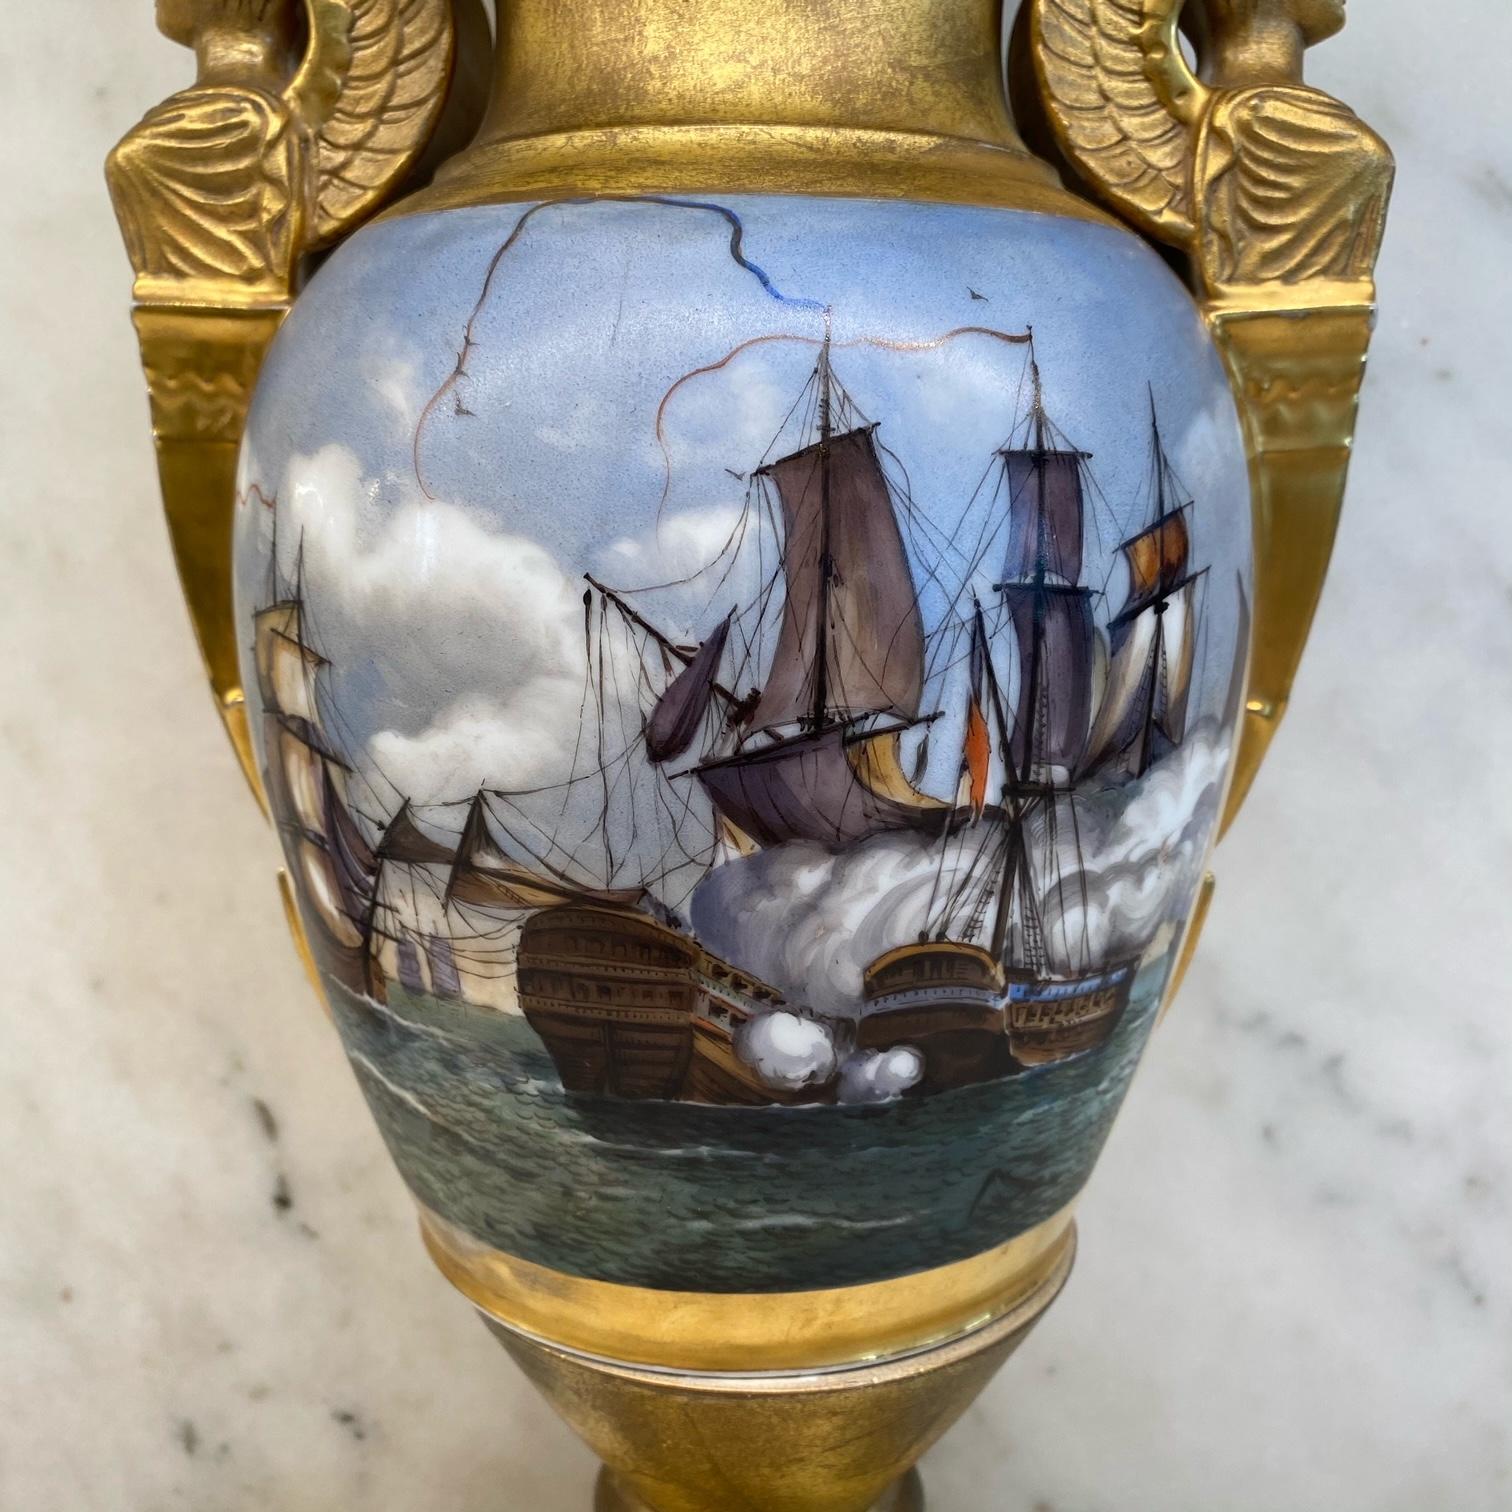 Beautiful 19th century important French vase with hand painted gold gilt crest or coat of arms on one side; a stunning hand painted and signed (artist indistinguishable) nautical painting of ships in battle on the other. The handles are magnificent